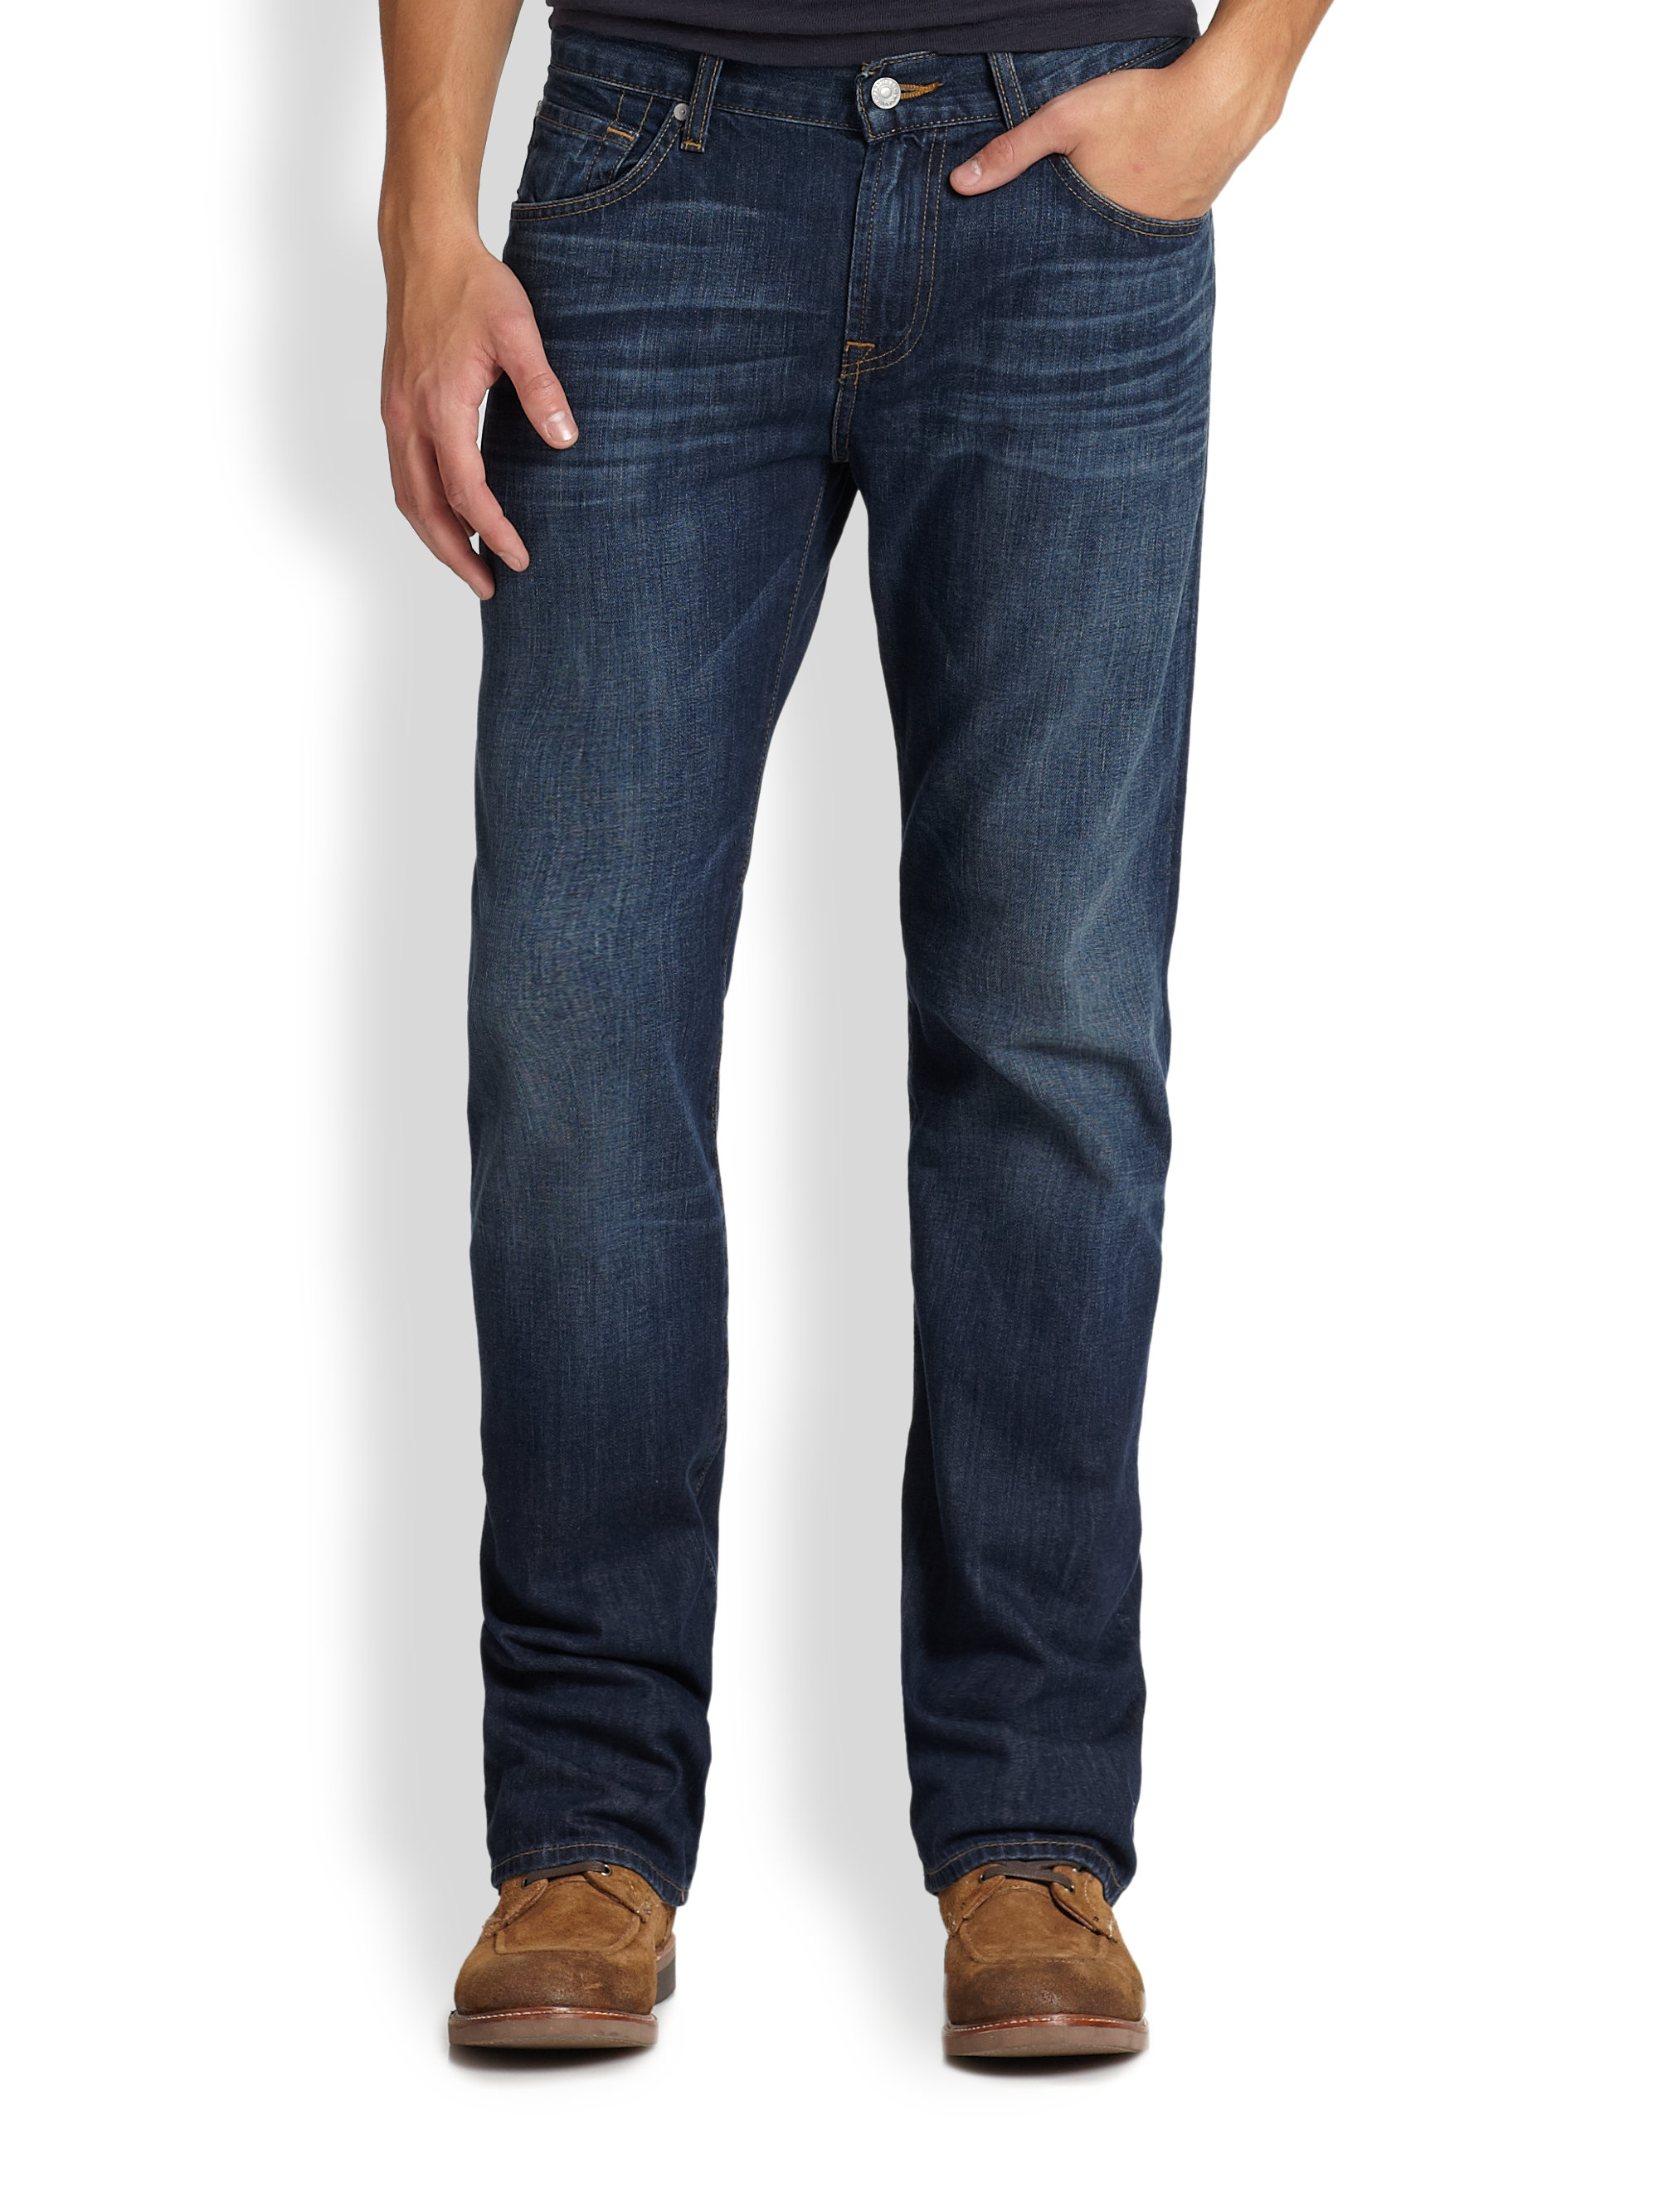 7 for all mankind austyn mens jeans